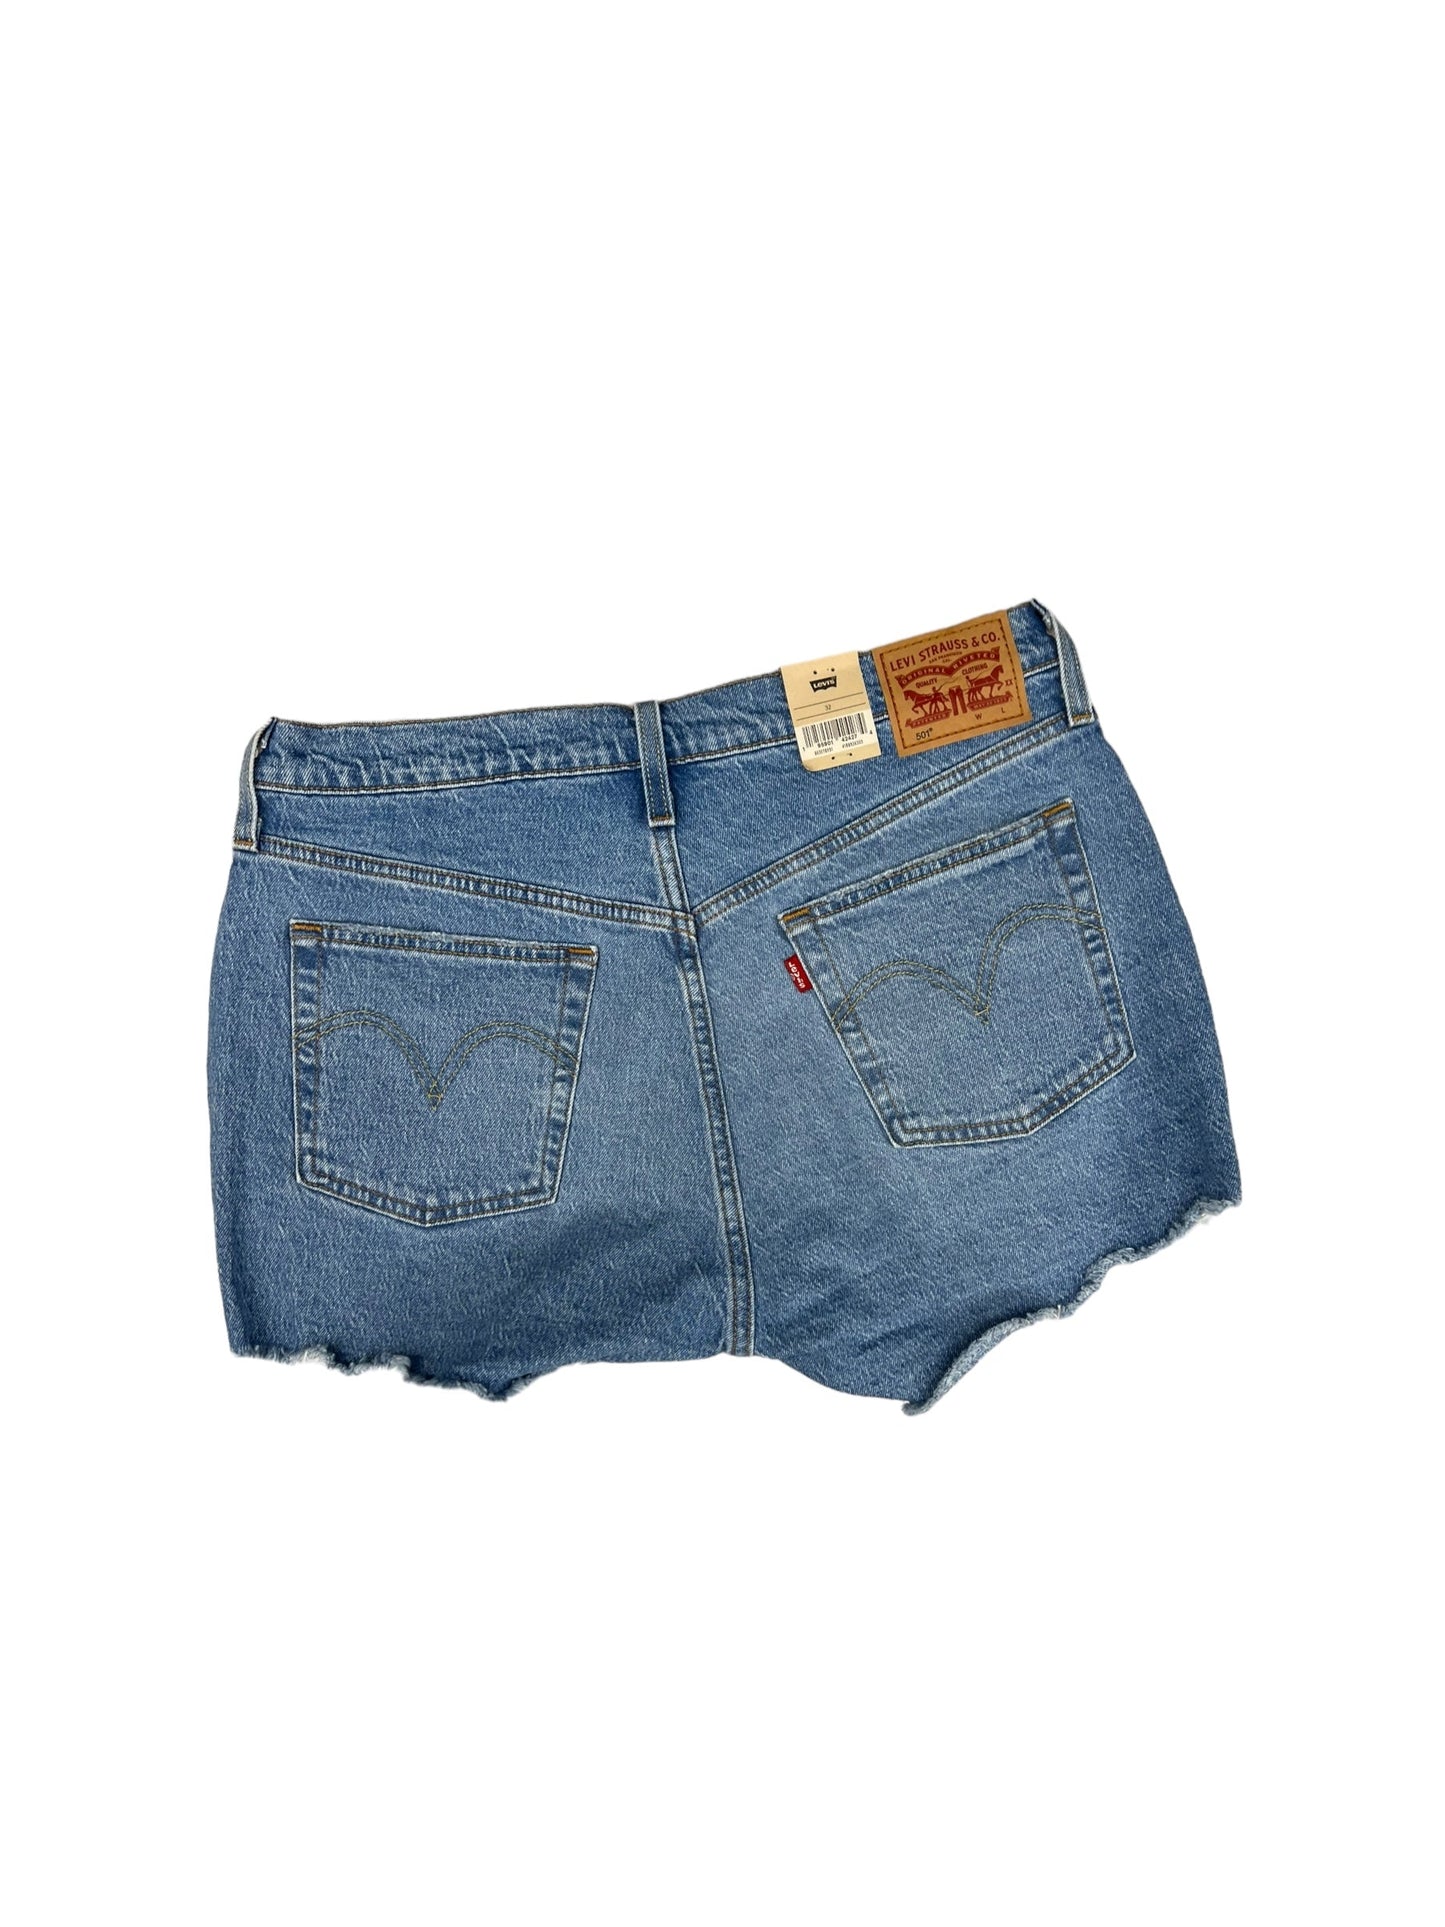 Shorts By Levis  Size: 32